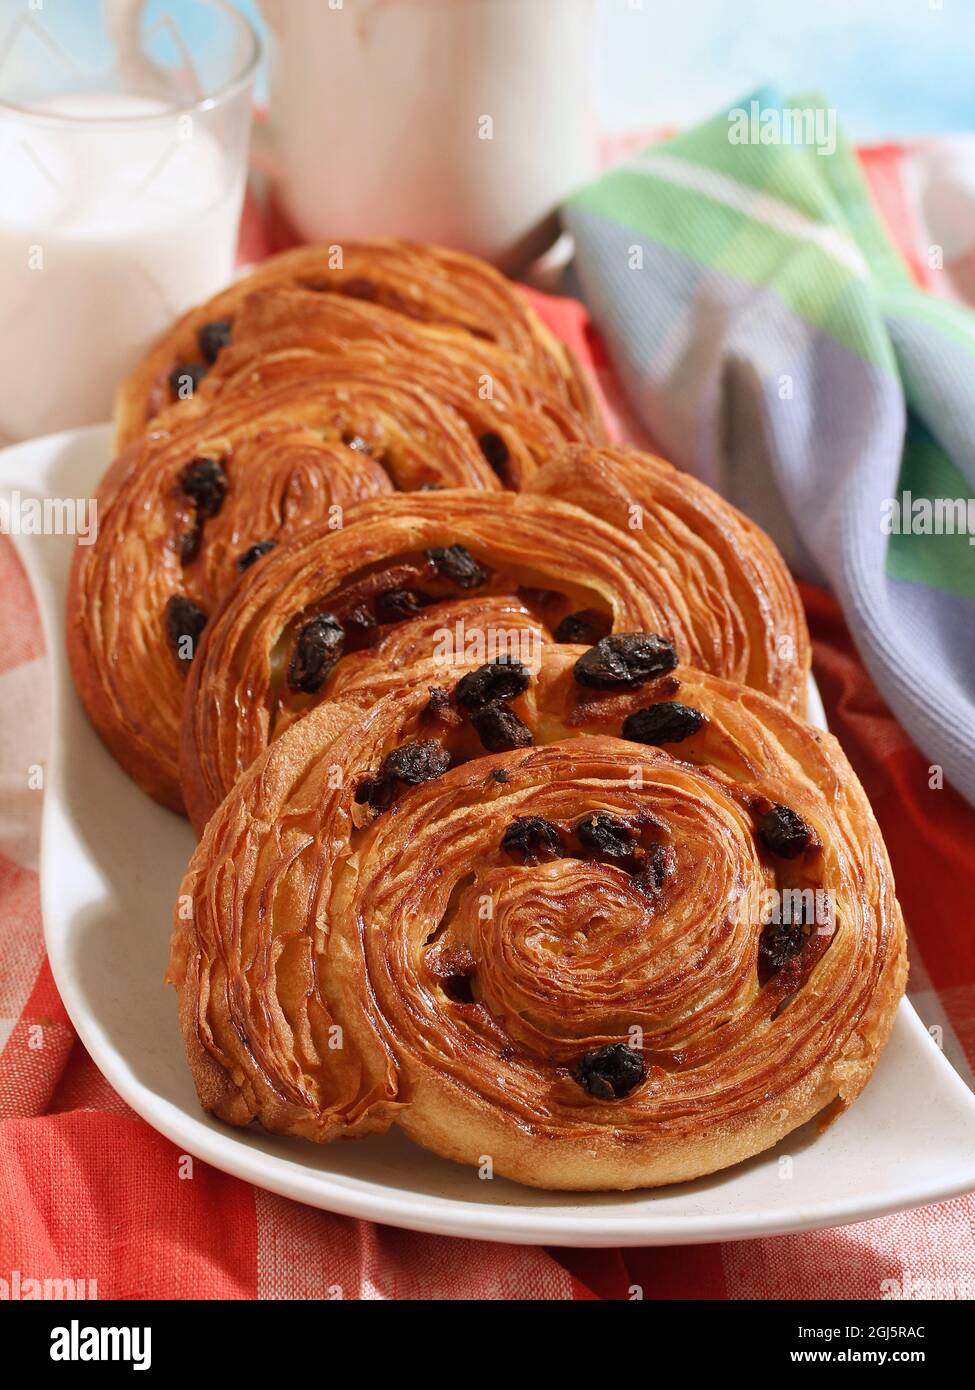 Schneckens. Pastry with raisins. Stock Photo